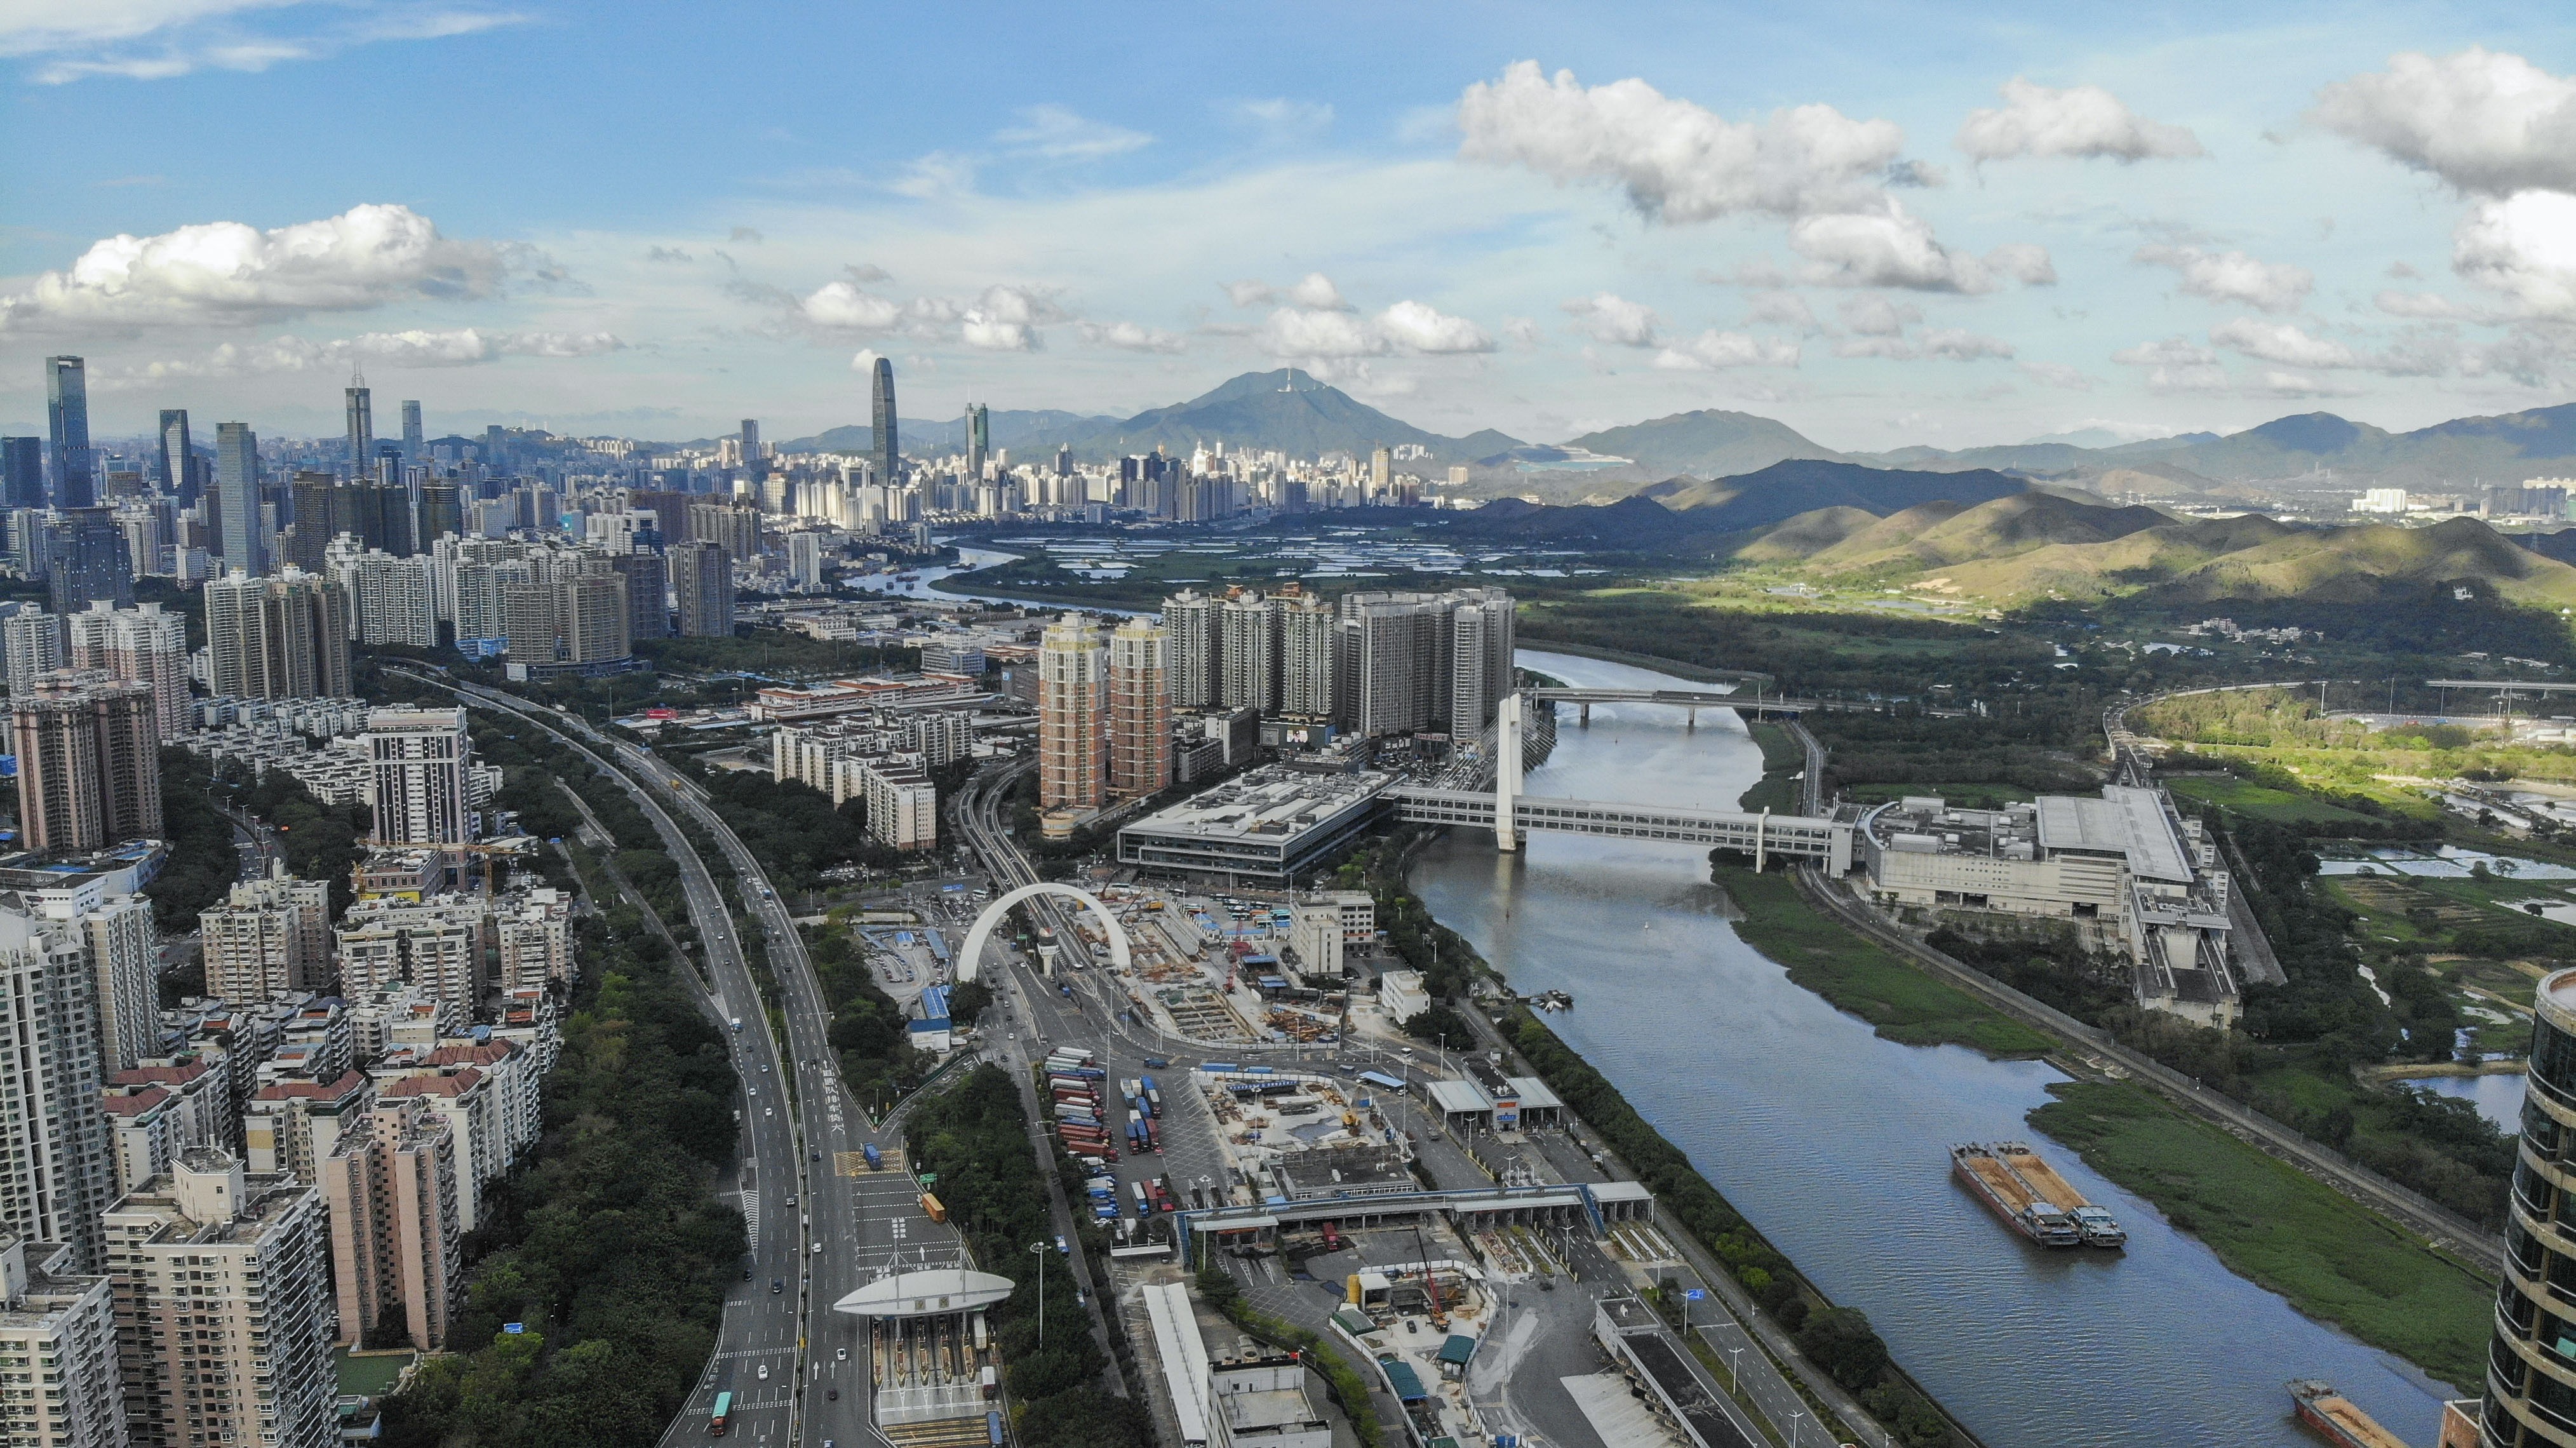 The Lok Ma Chau border bridge, right. The Lok Ma Chau Loop, once completed, will be ‘an iconic powerhouse on the Hong Kong-Shenzhen border’, writes Nigel Smith, managing director of Colliers International Hong Kong. Photo: Roy Issa